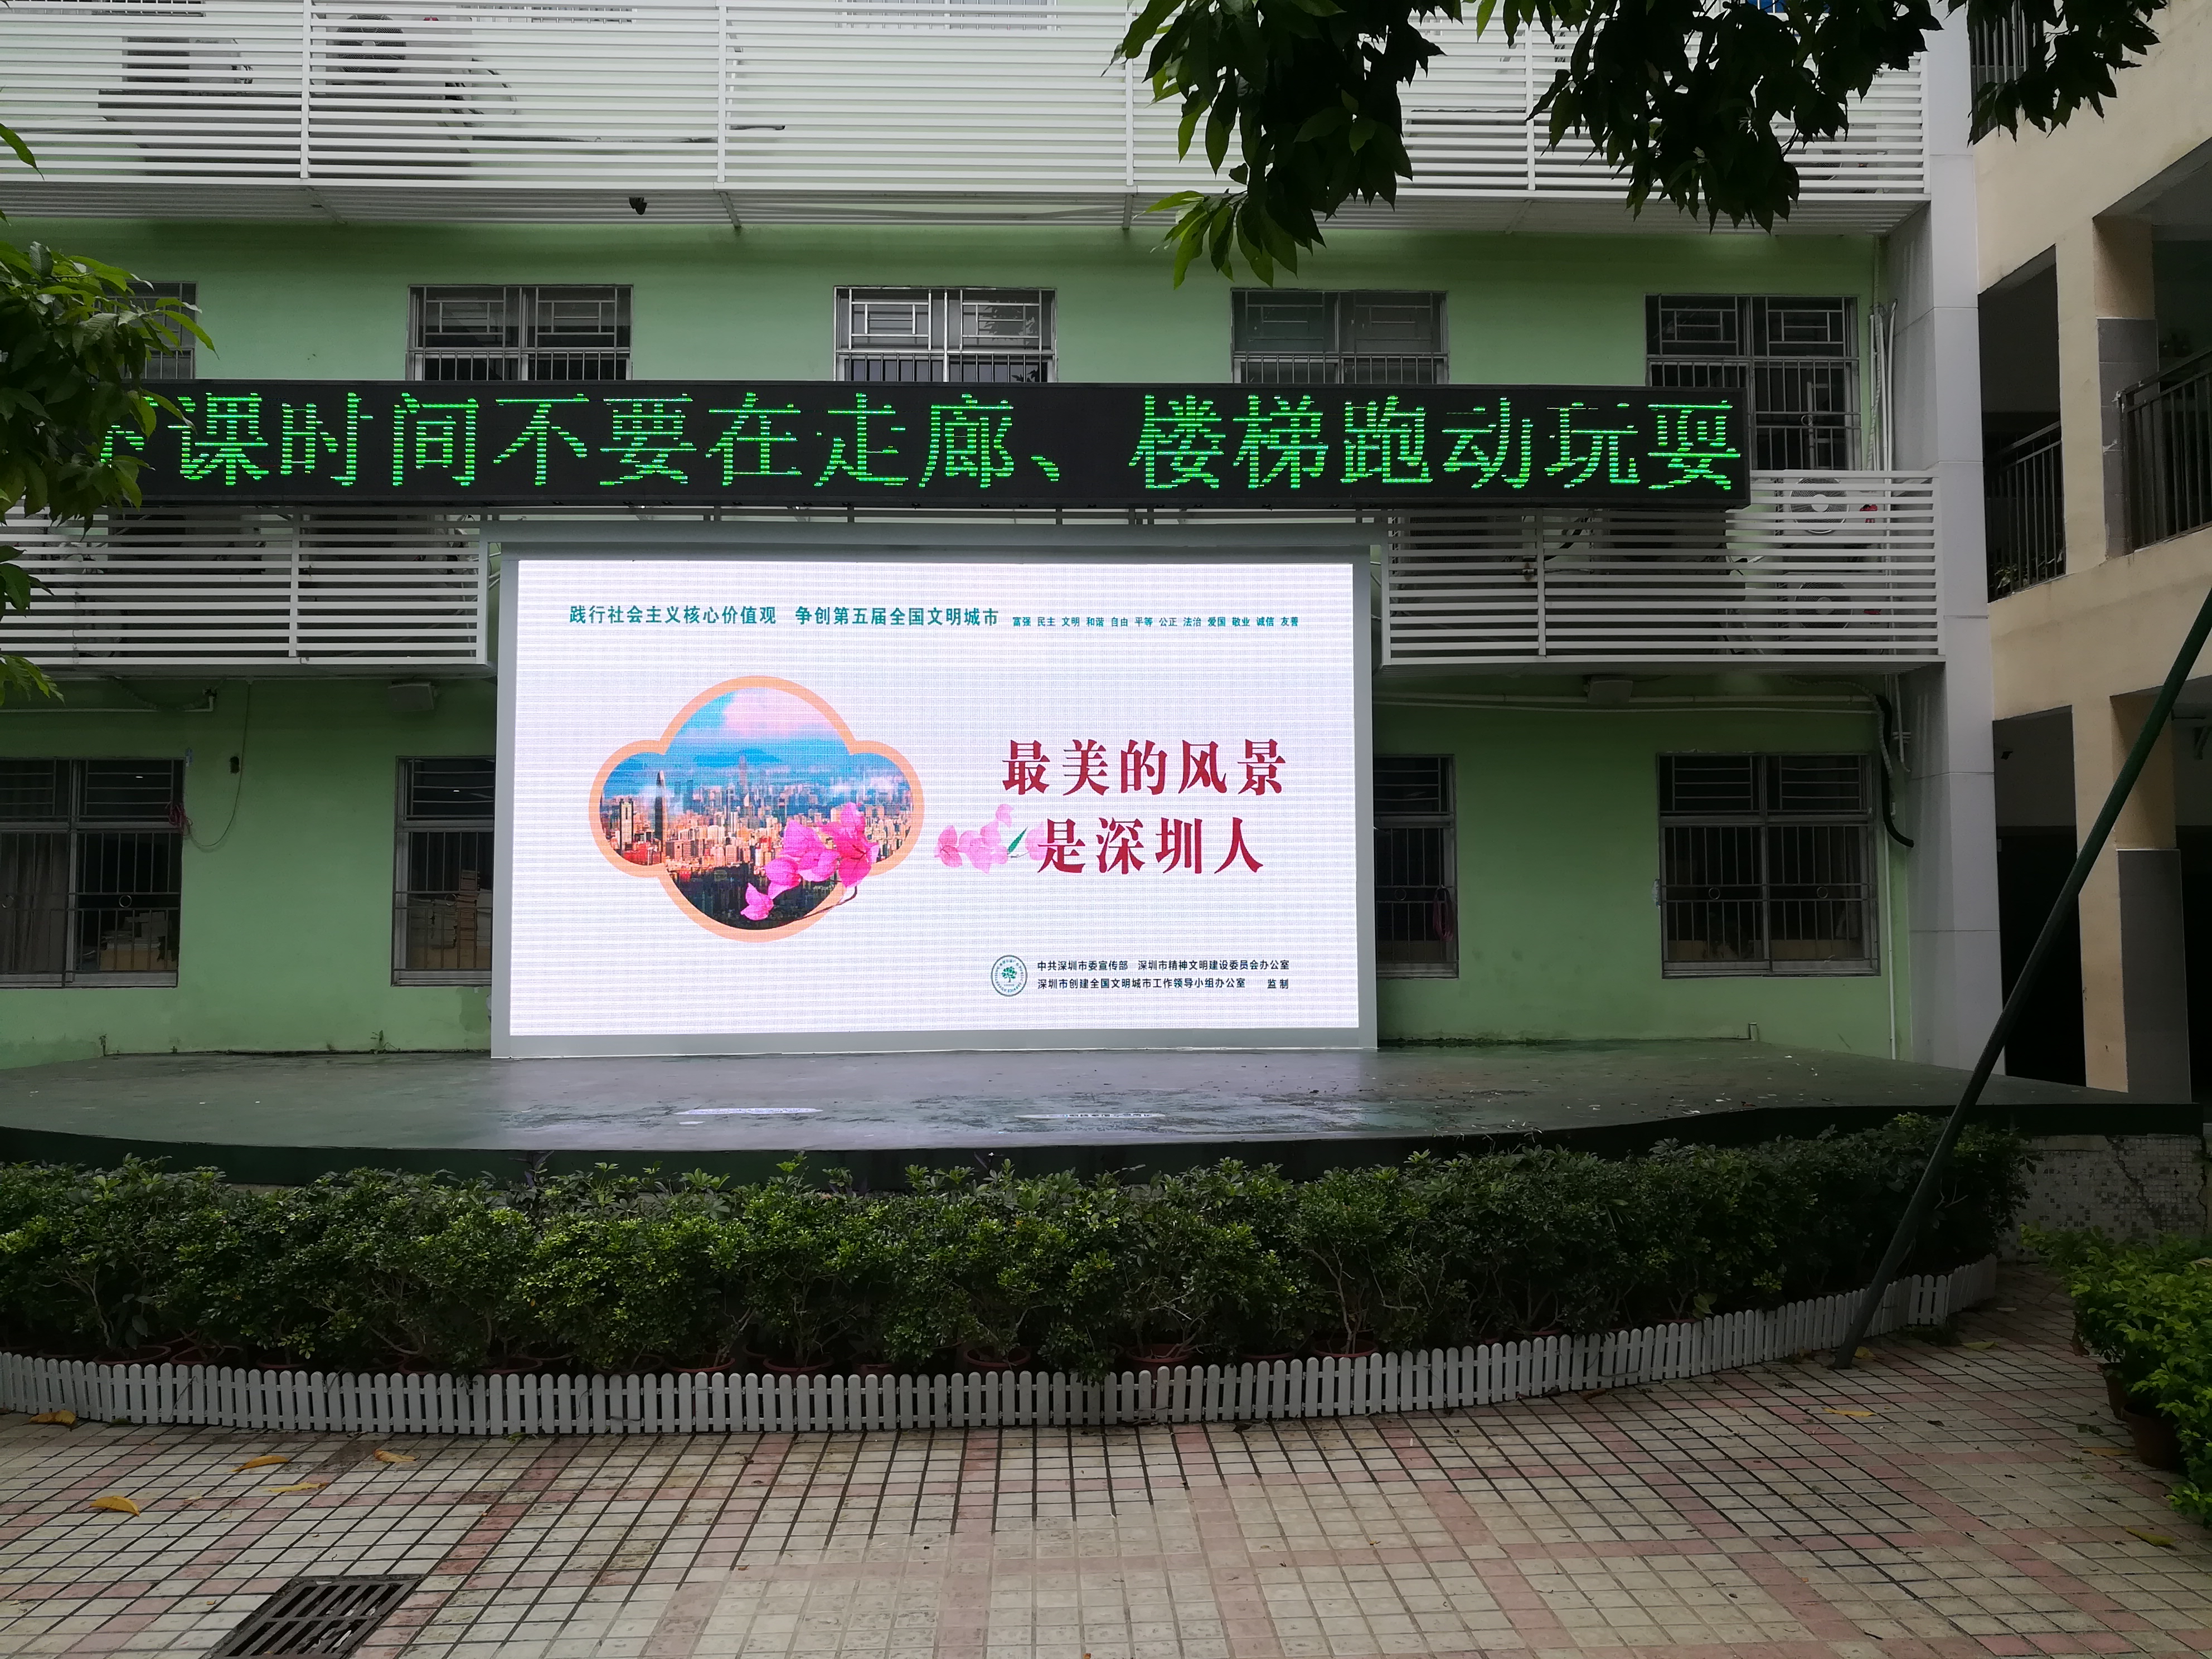 https://www.szradiant.com/products/fixed-instalaltion-led-display/fixed-outdoor-led-display/